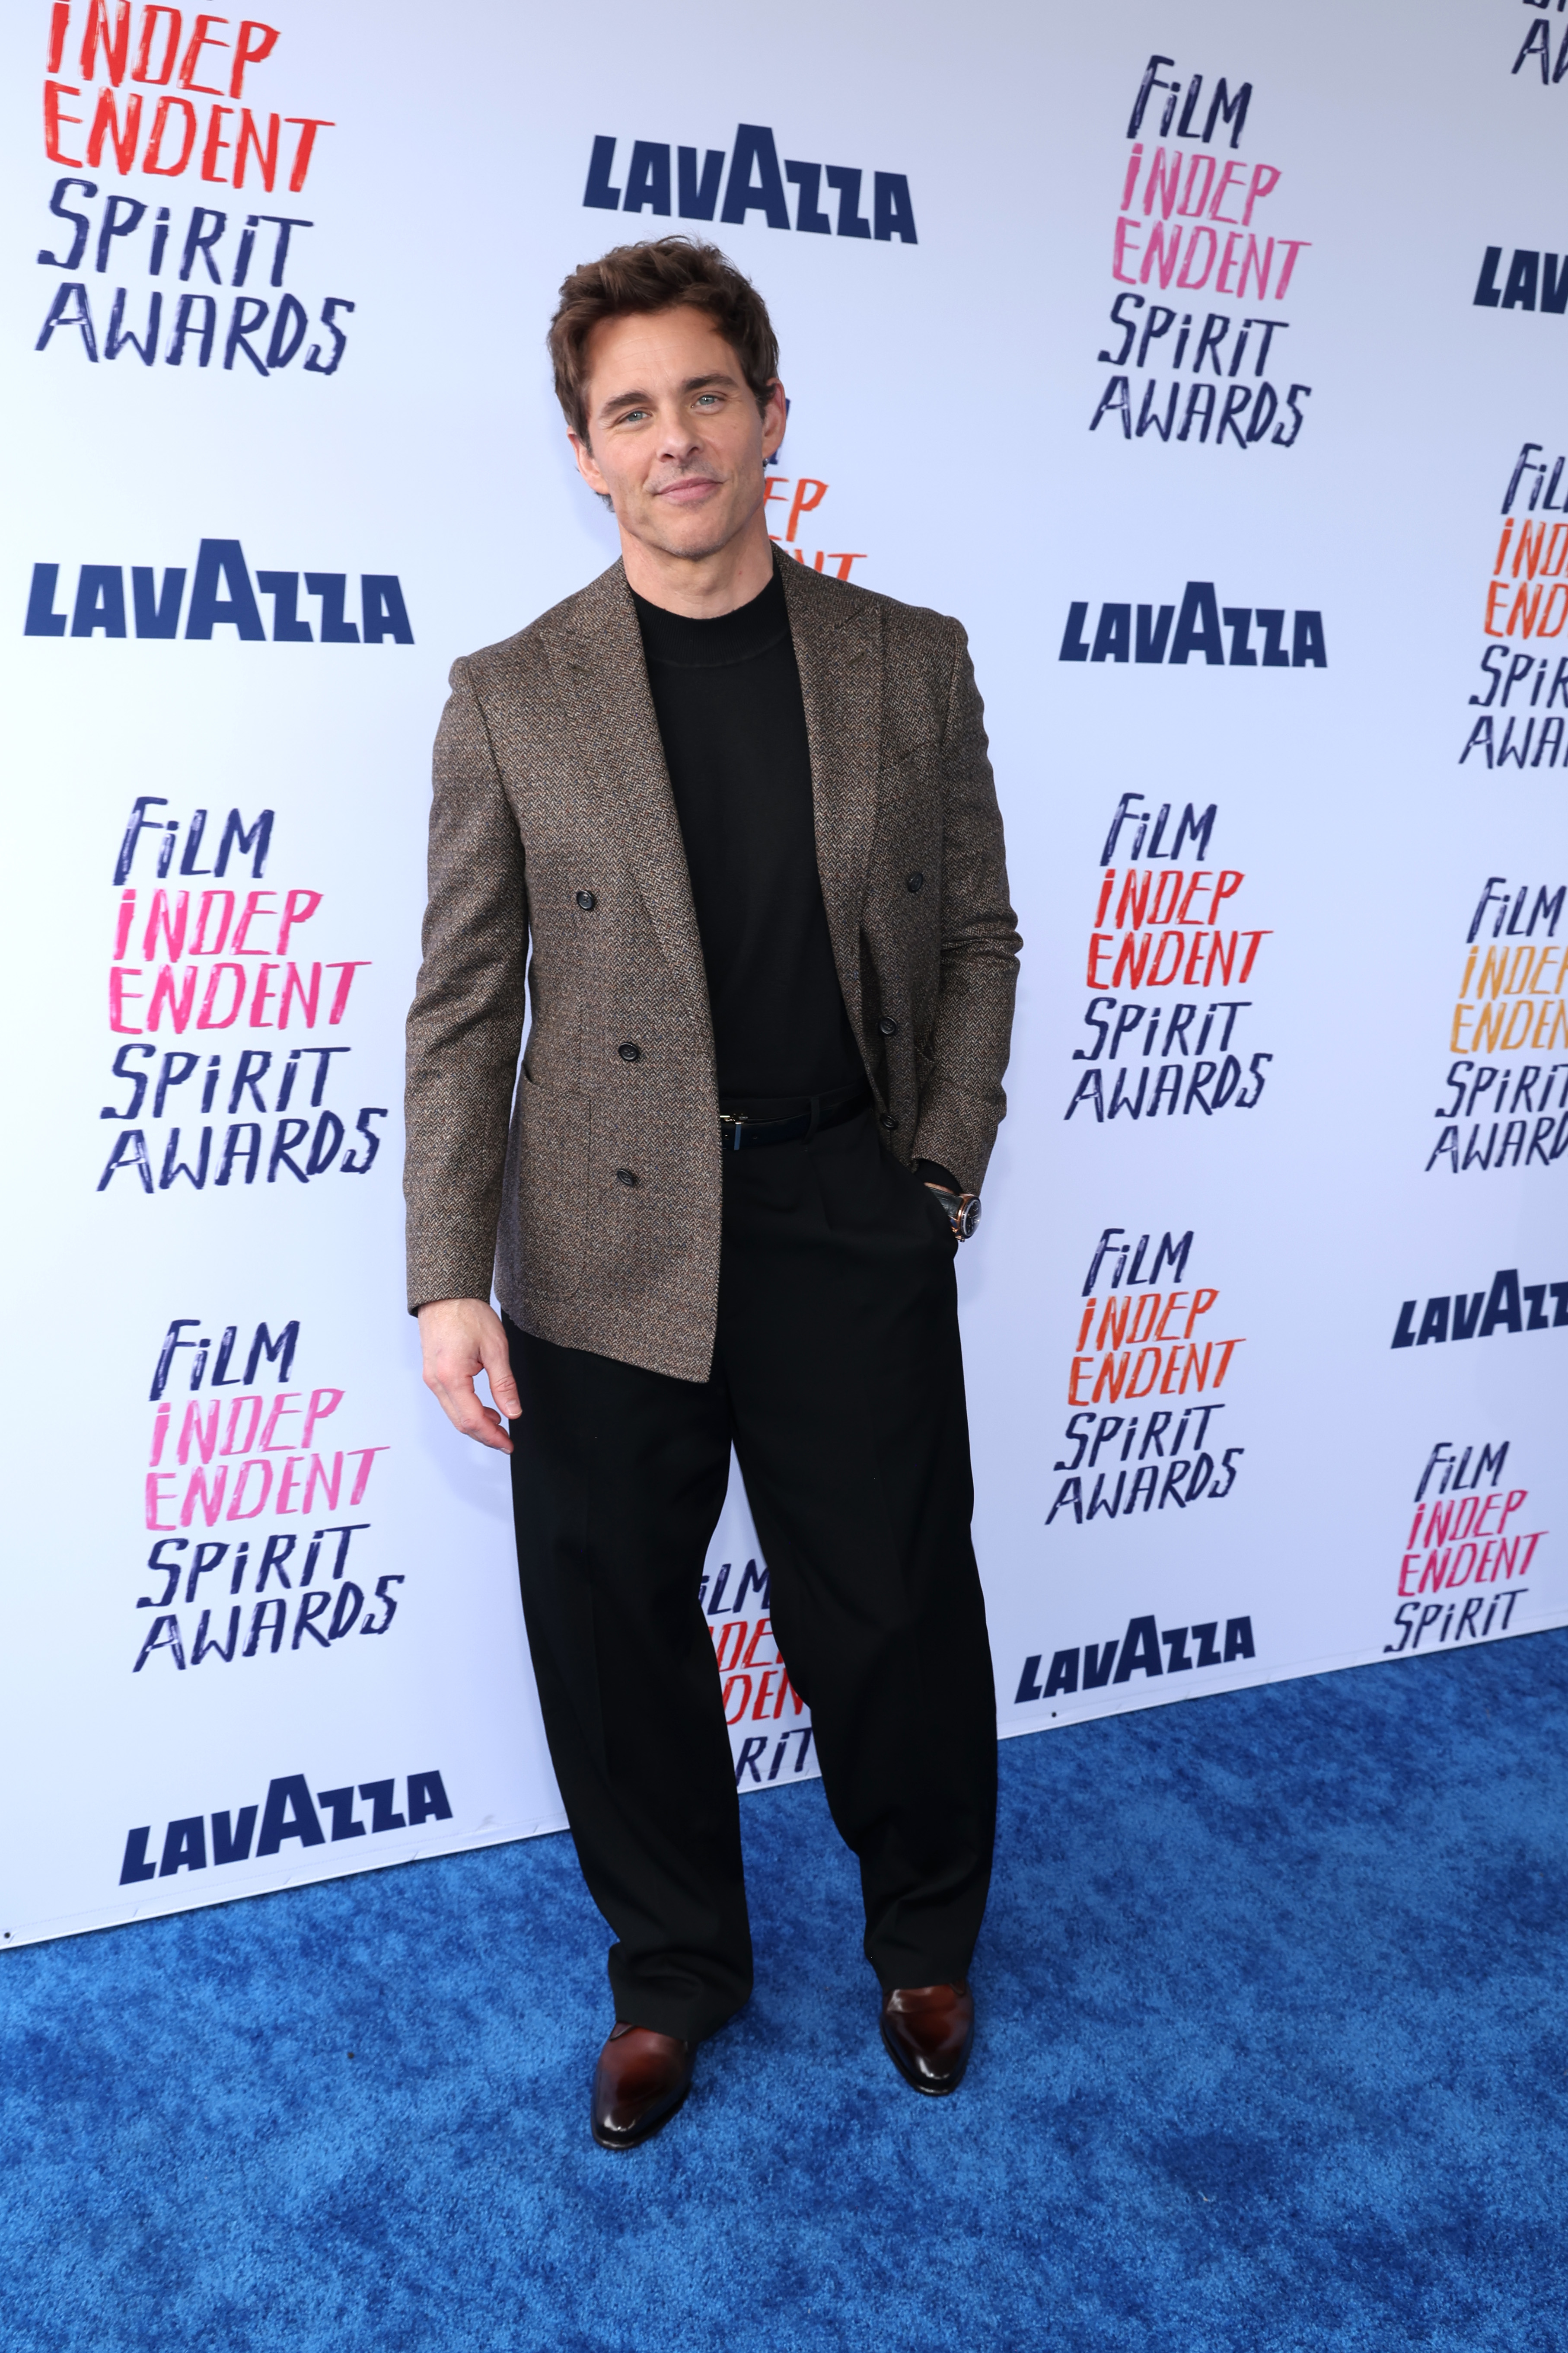 James wearing a blazer over a top with dress shoes